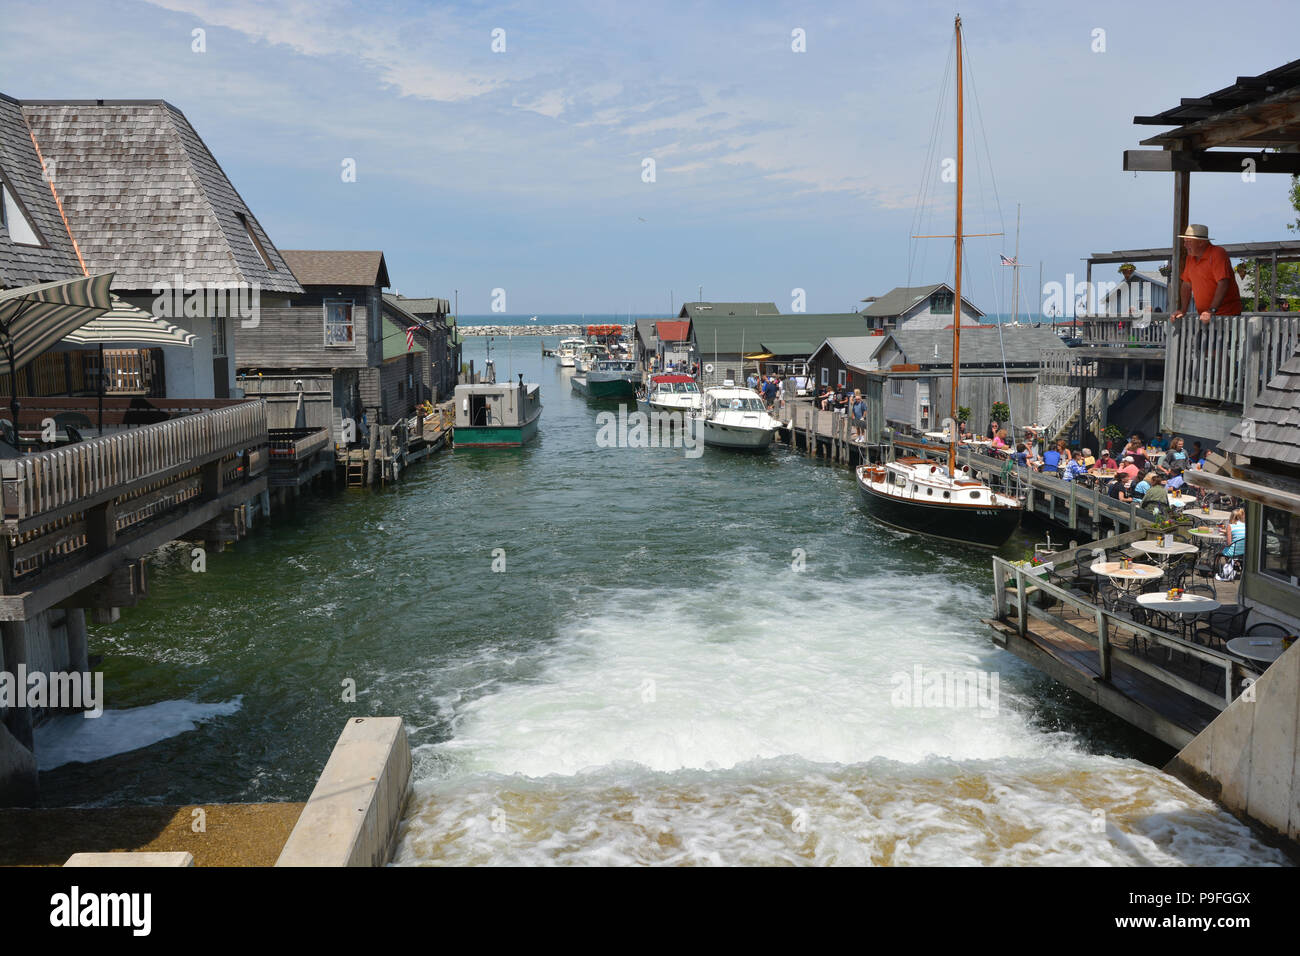 Fishtown in Leland, Michigan is a restored fishing village with shops and restaurants filling the shanties. Stock Photo